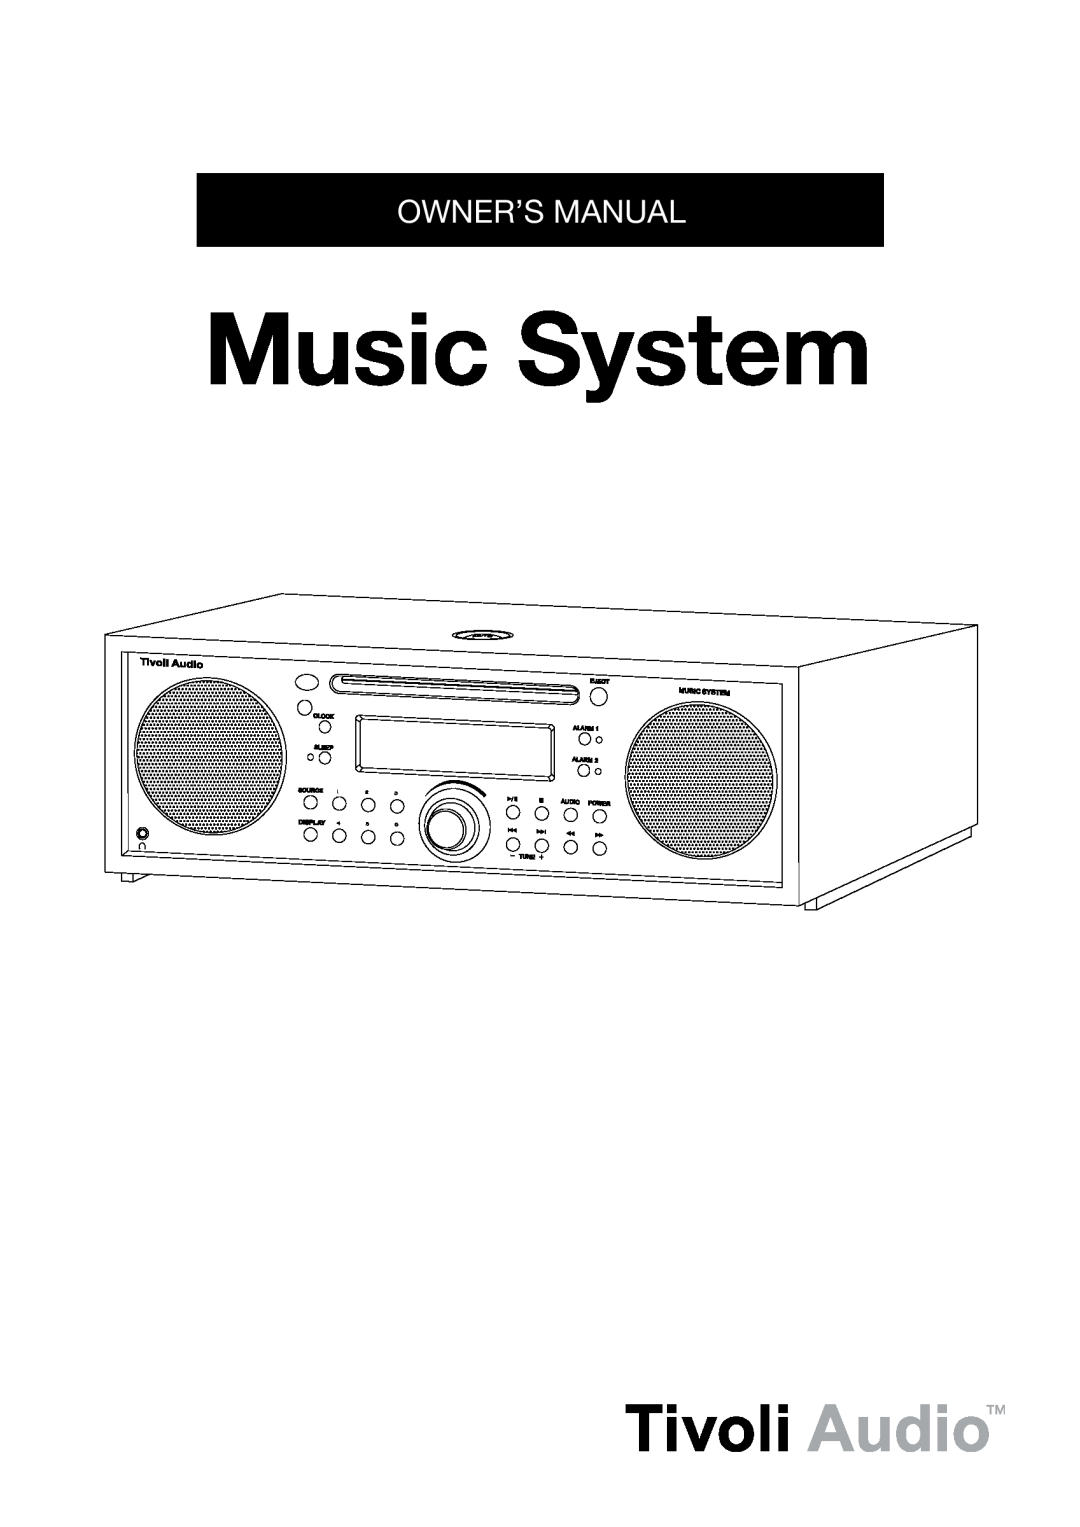 Tivoli Audio MUSIC SYSTEM owner manual Music System, Owner’S Manual 